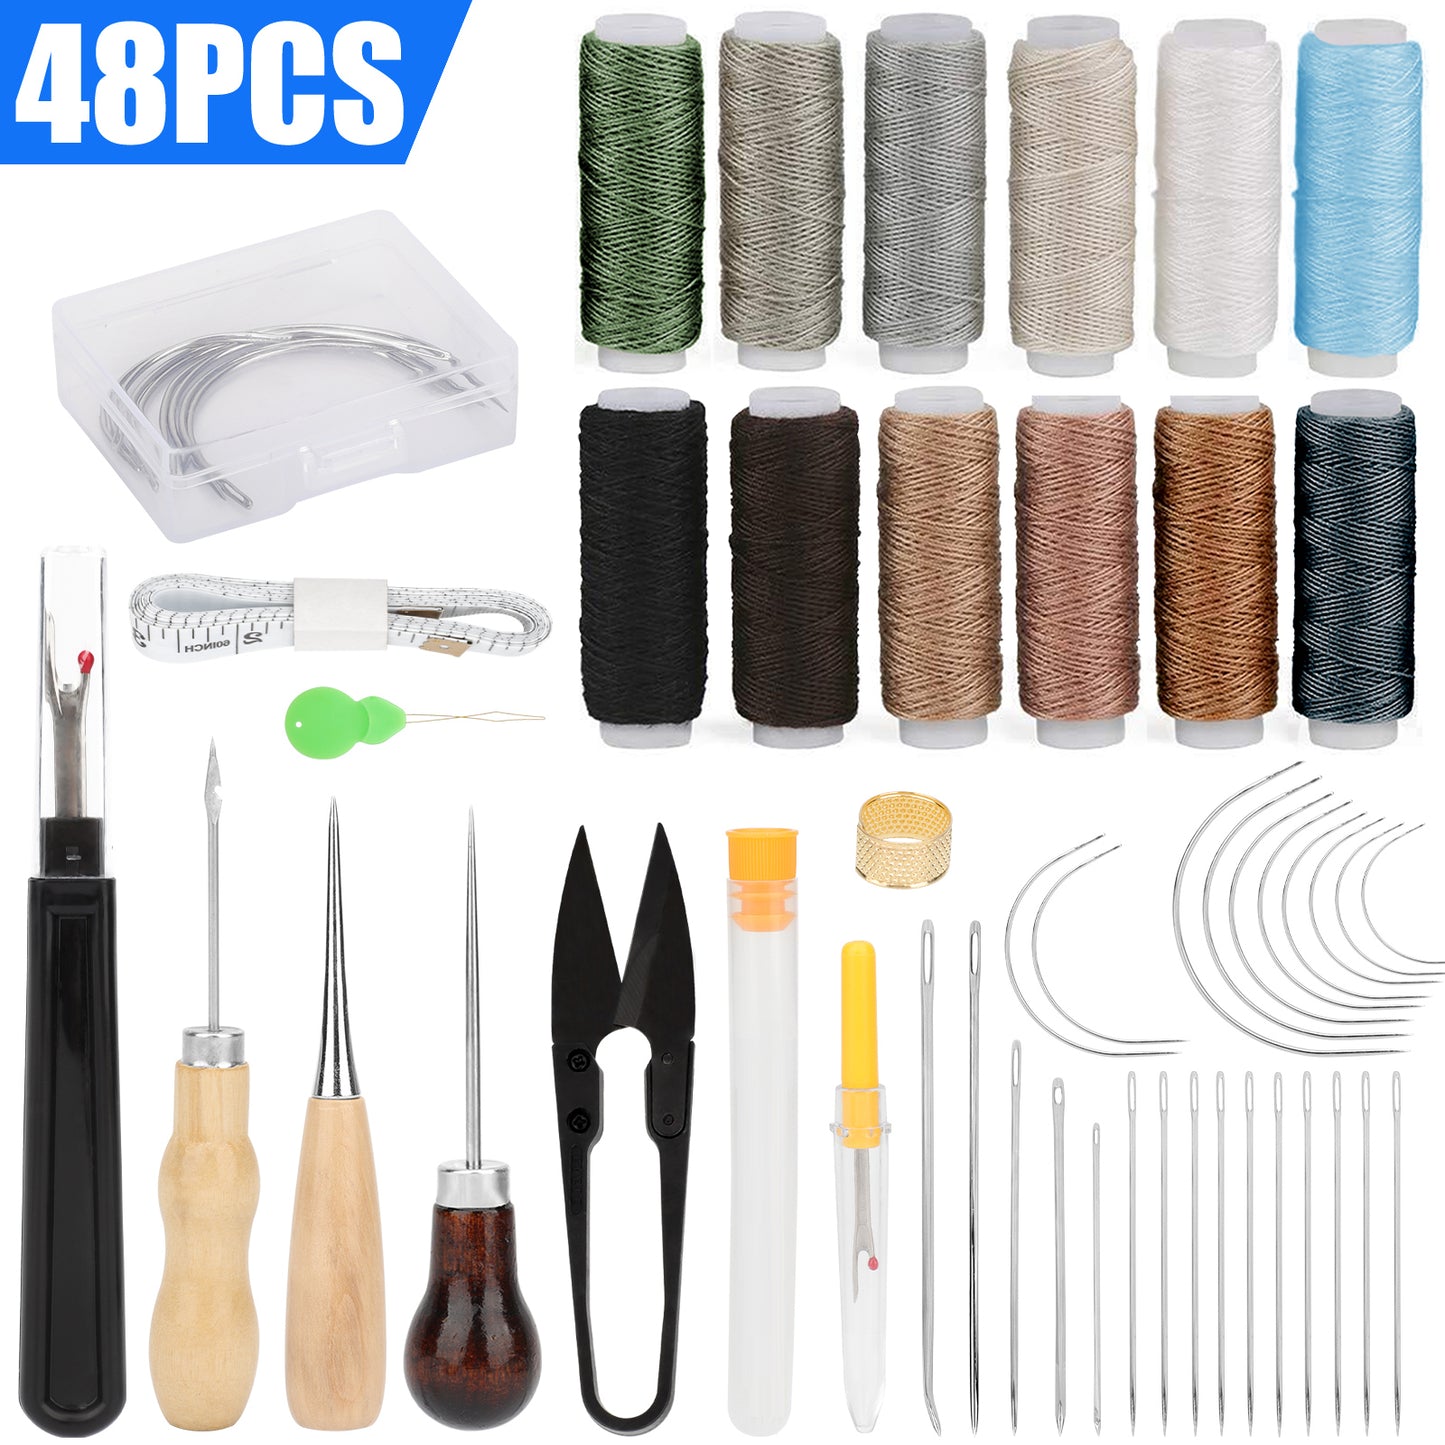 48pcs Leather Sewing Tools Kit - Needles, Thread, Awl Hand Tools for DIY Craft